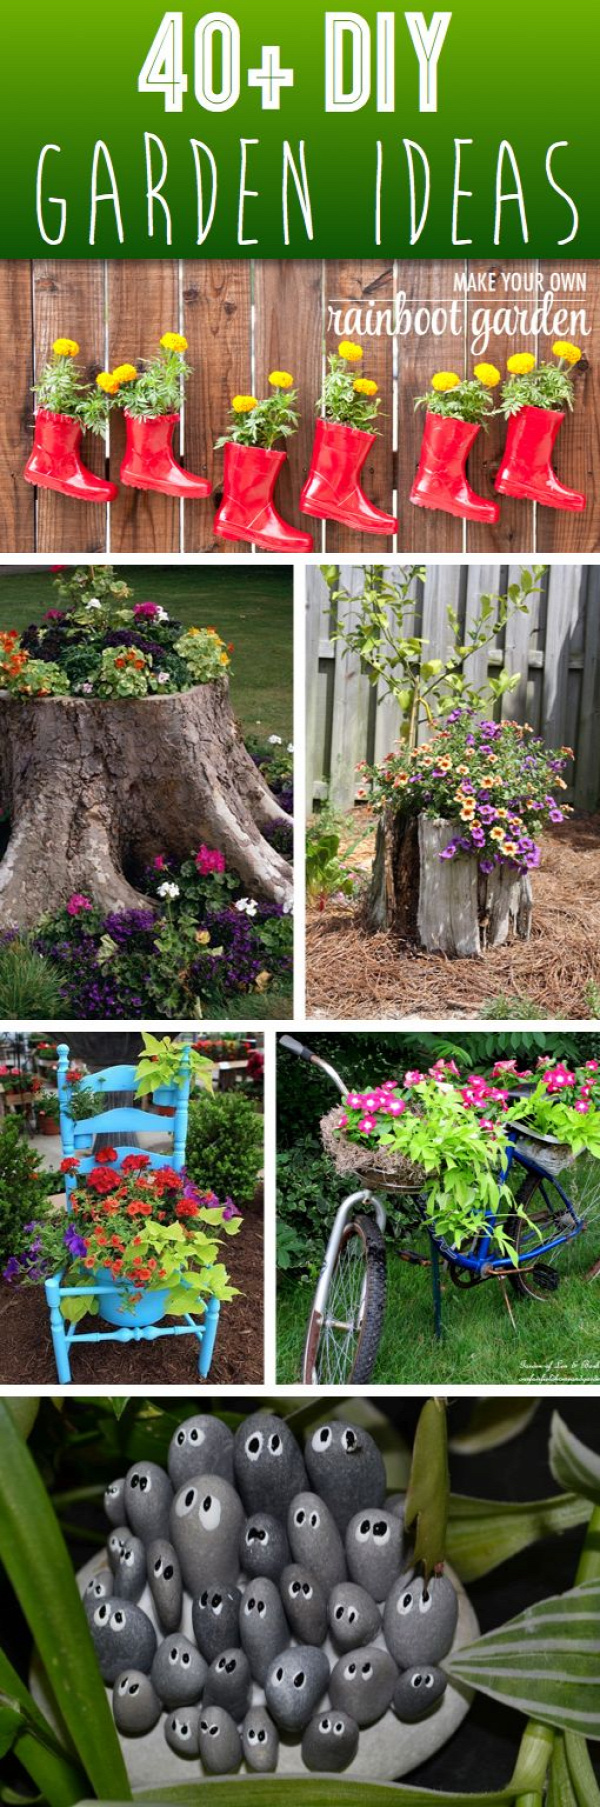 Give Your Backyard A Complete Makeover With These 40+ DIY Garden Ideas